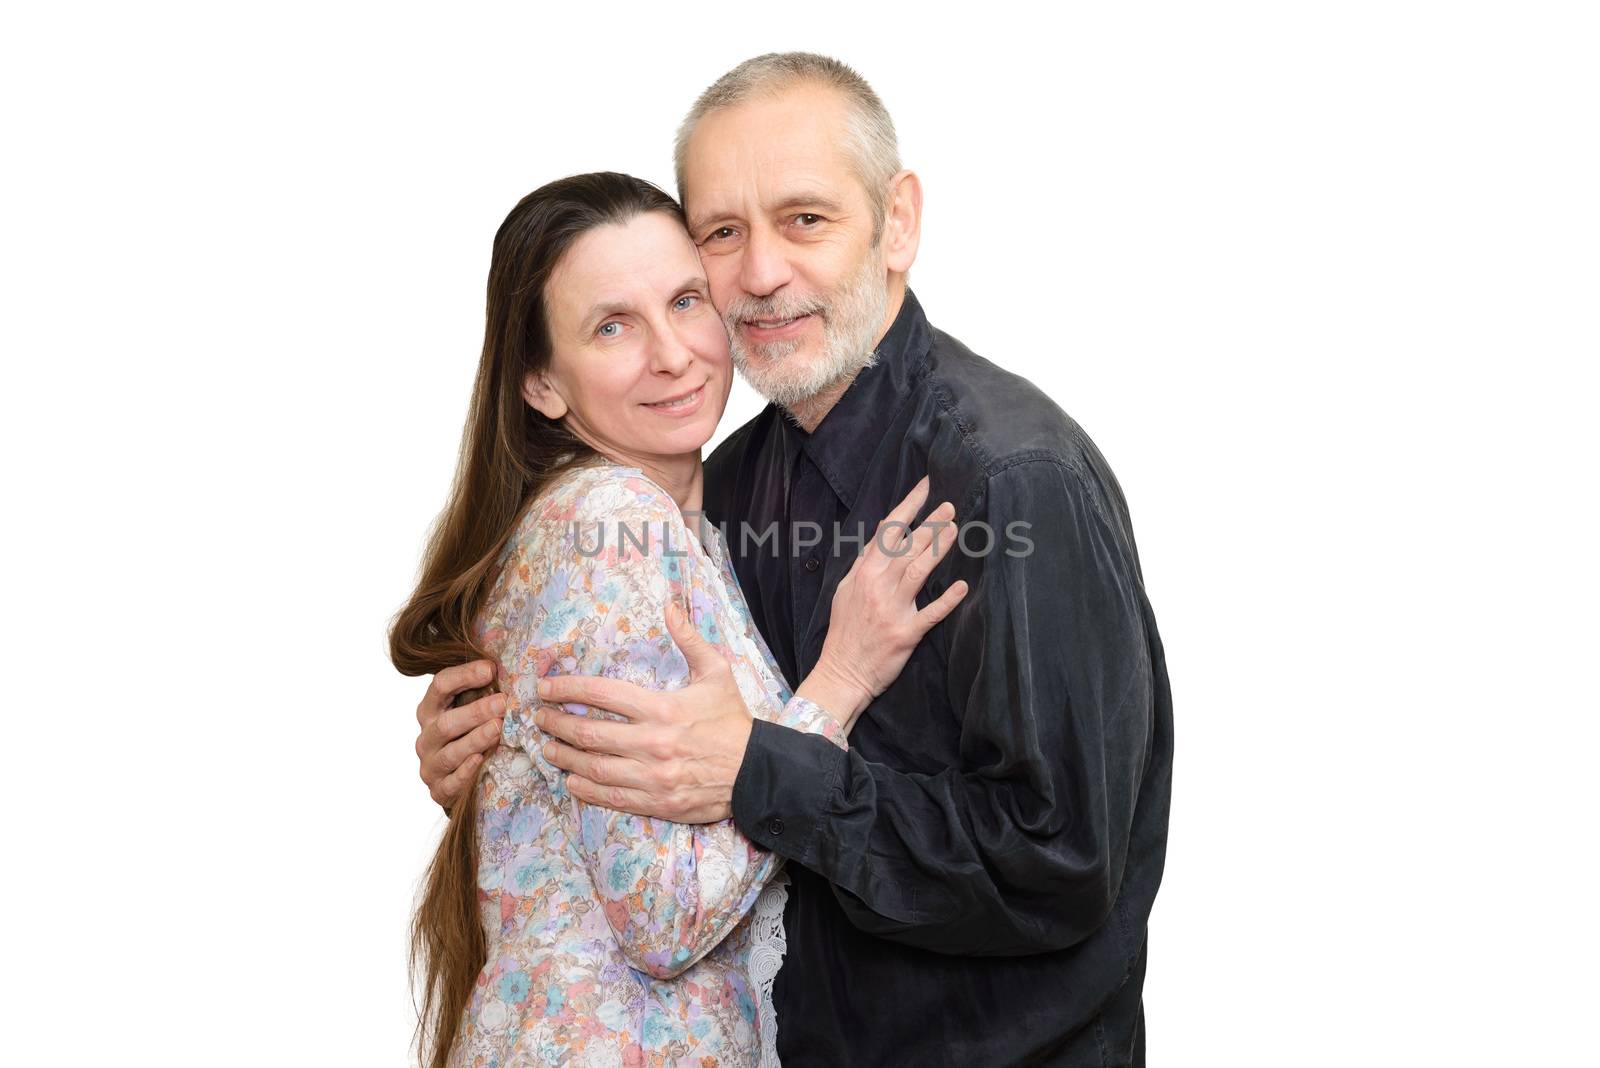 Mature man and woman with long hair embracing each other with love for S. Valentine's day or anniversary. Isolated on white background.